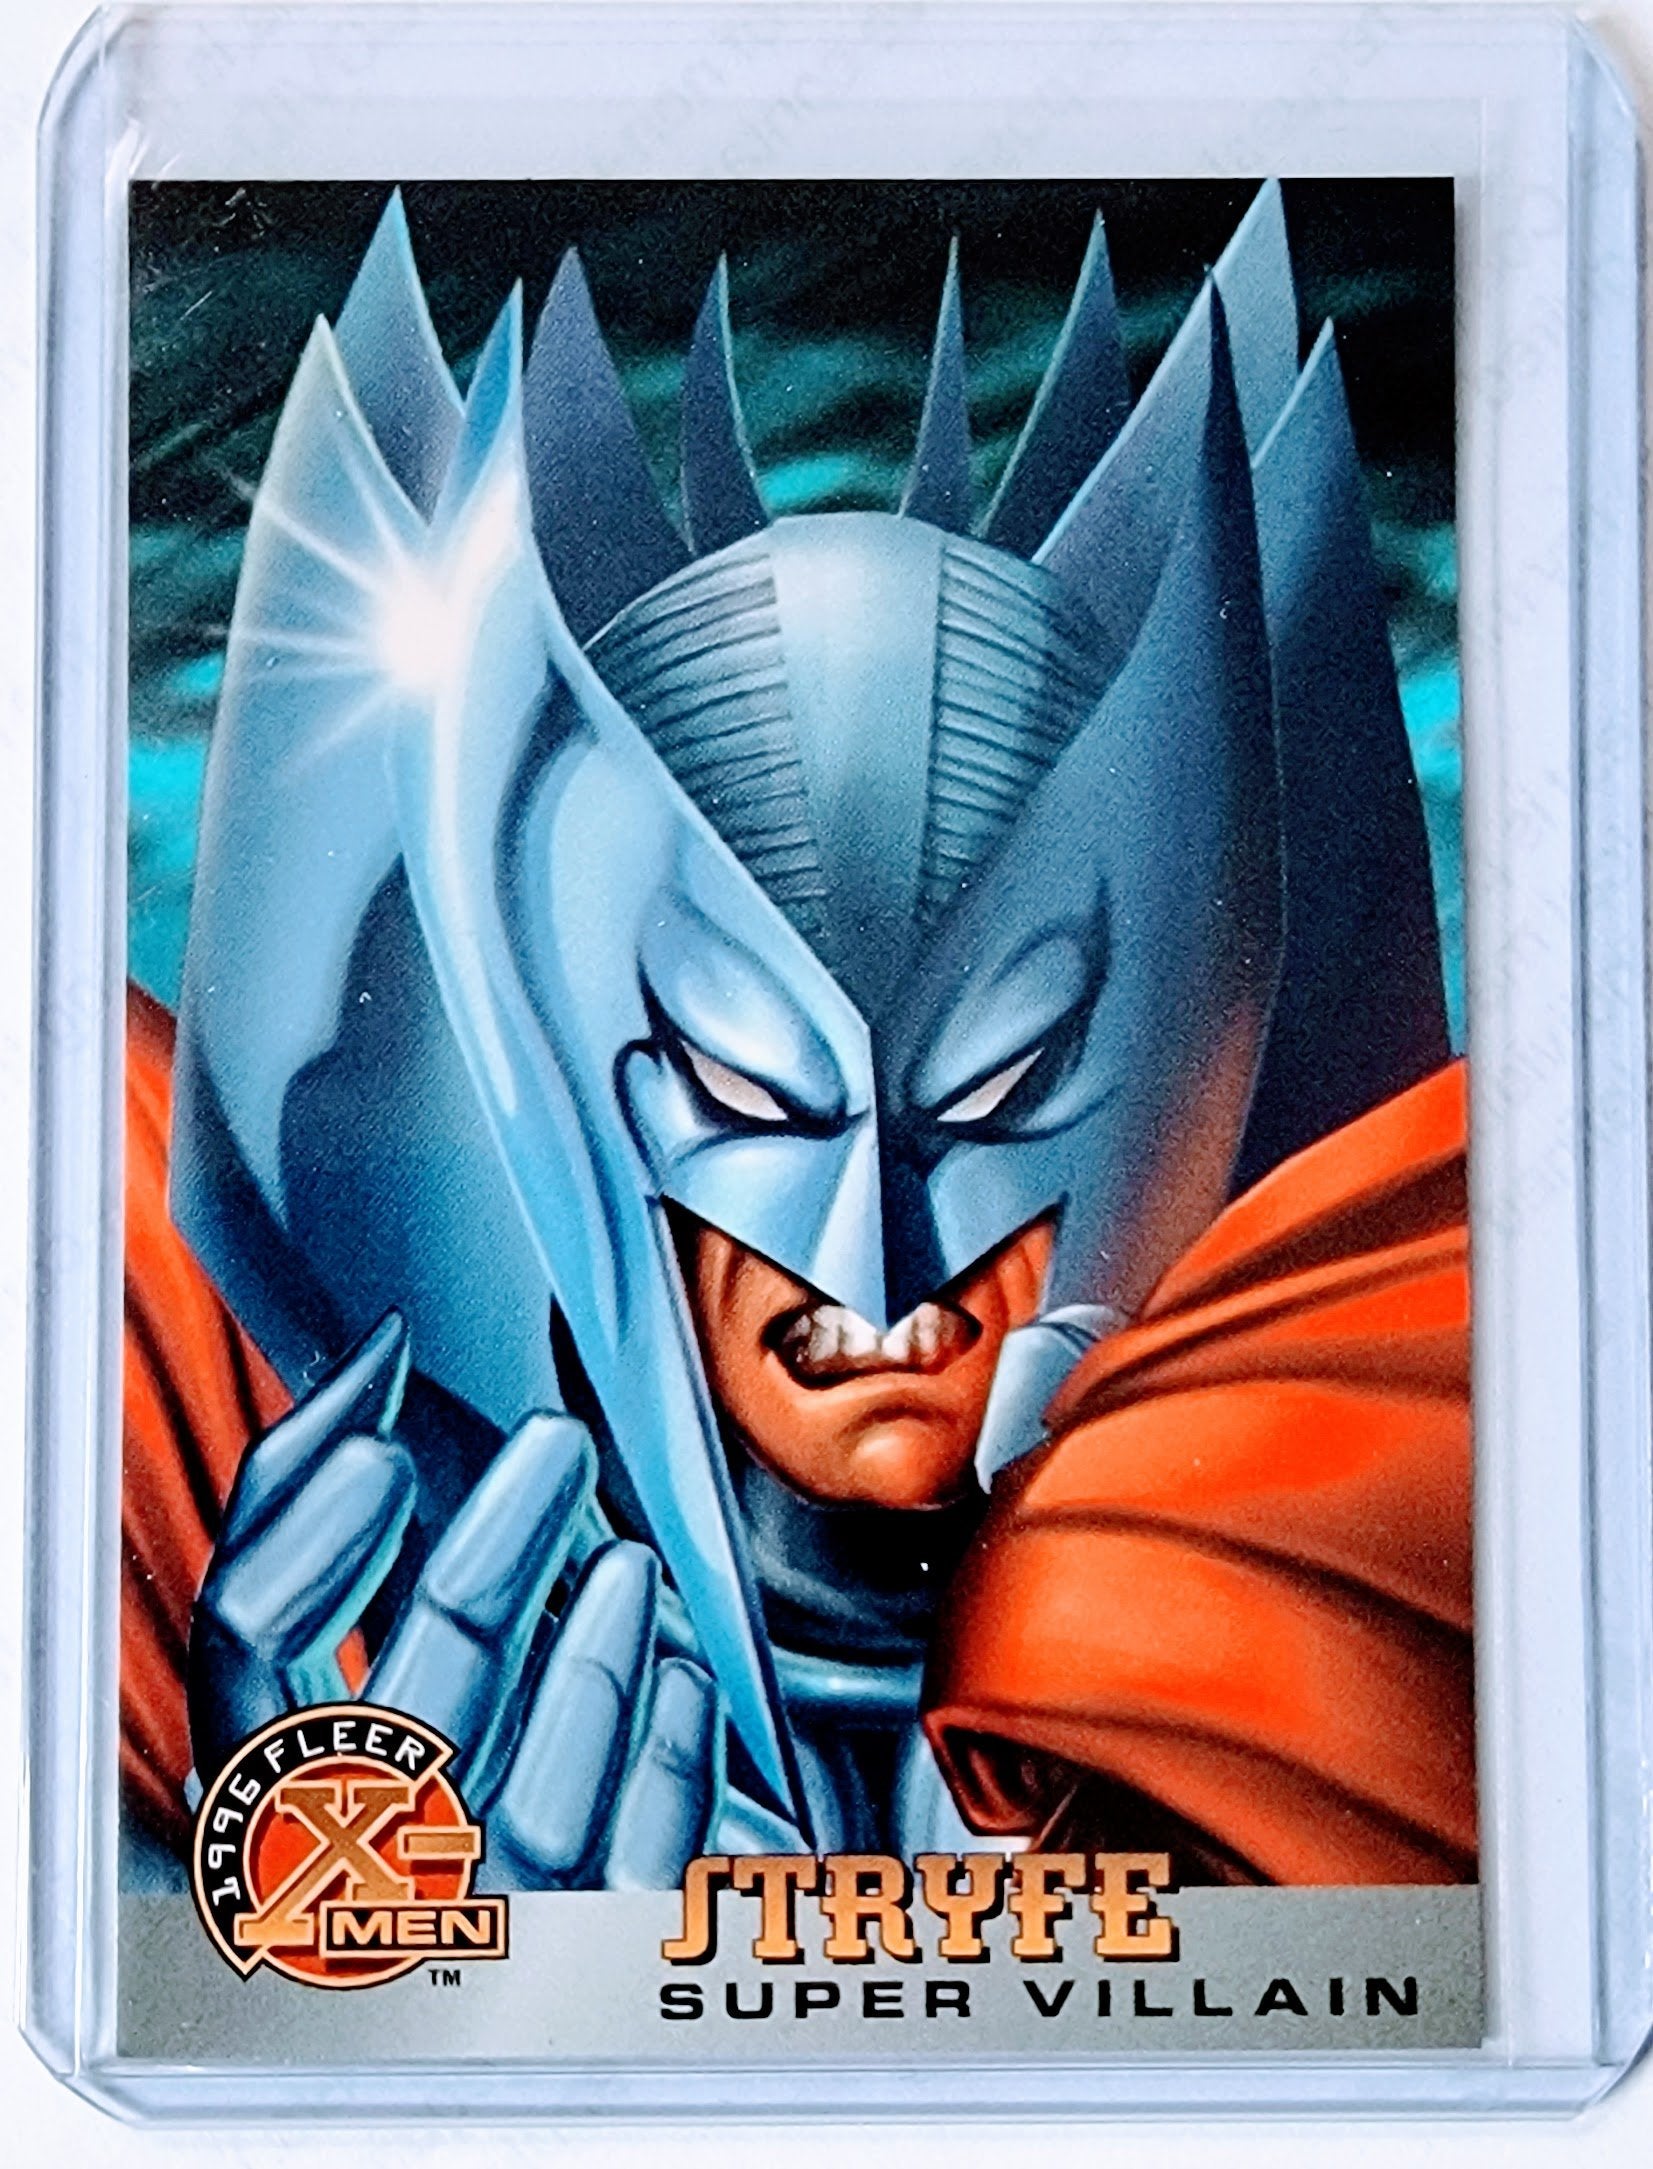 1996 Fleer X-Men Stryfe Super Villain Marvel Trading Card GRB1 simple Xclusive Collectibles   